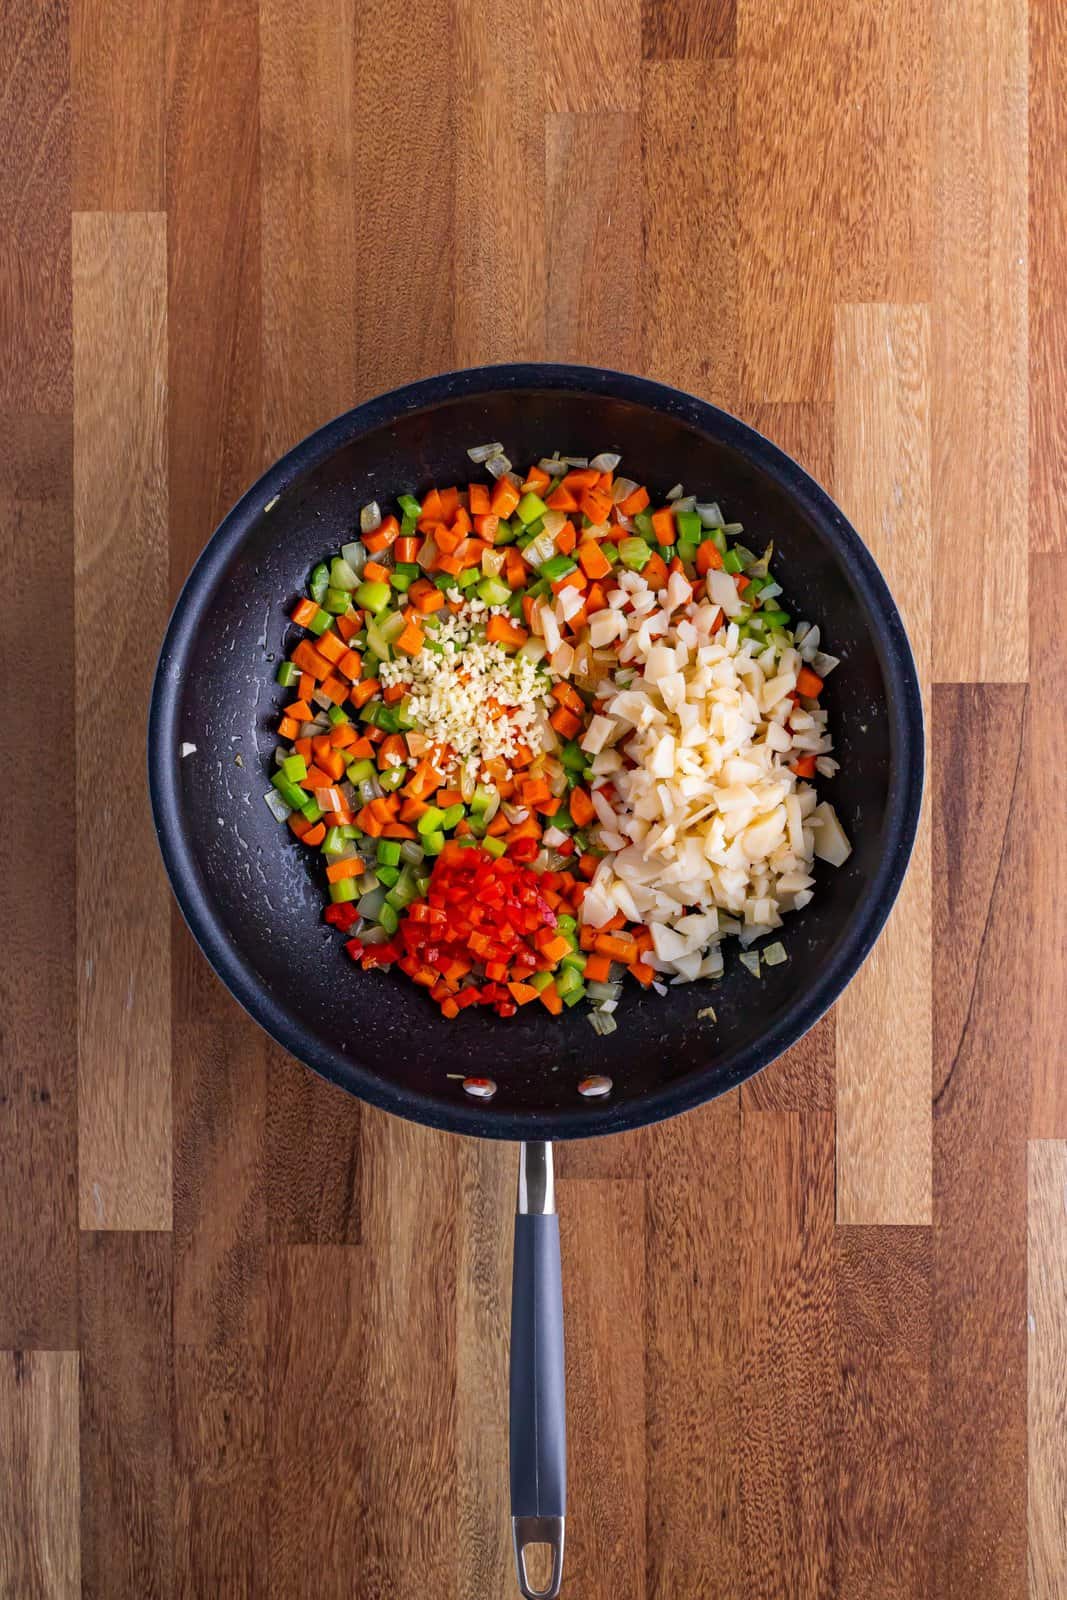 Skillet with celery, butter onion, garlic, pimentos and water chestnuts and carrots all mixed together and sauteed.